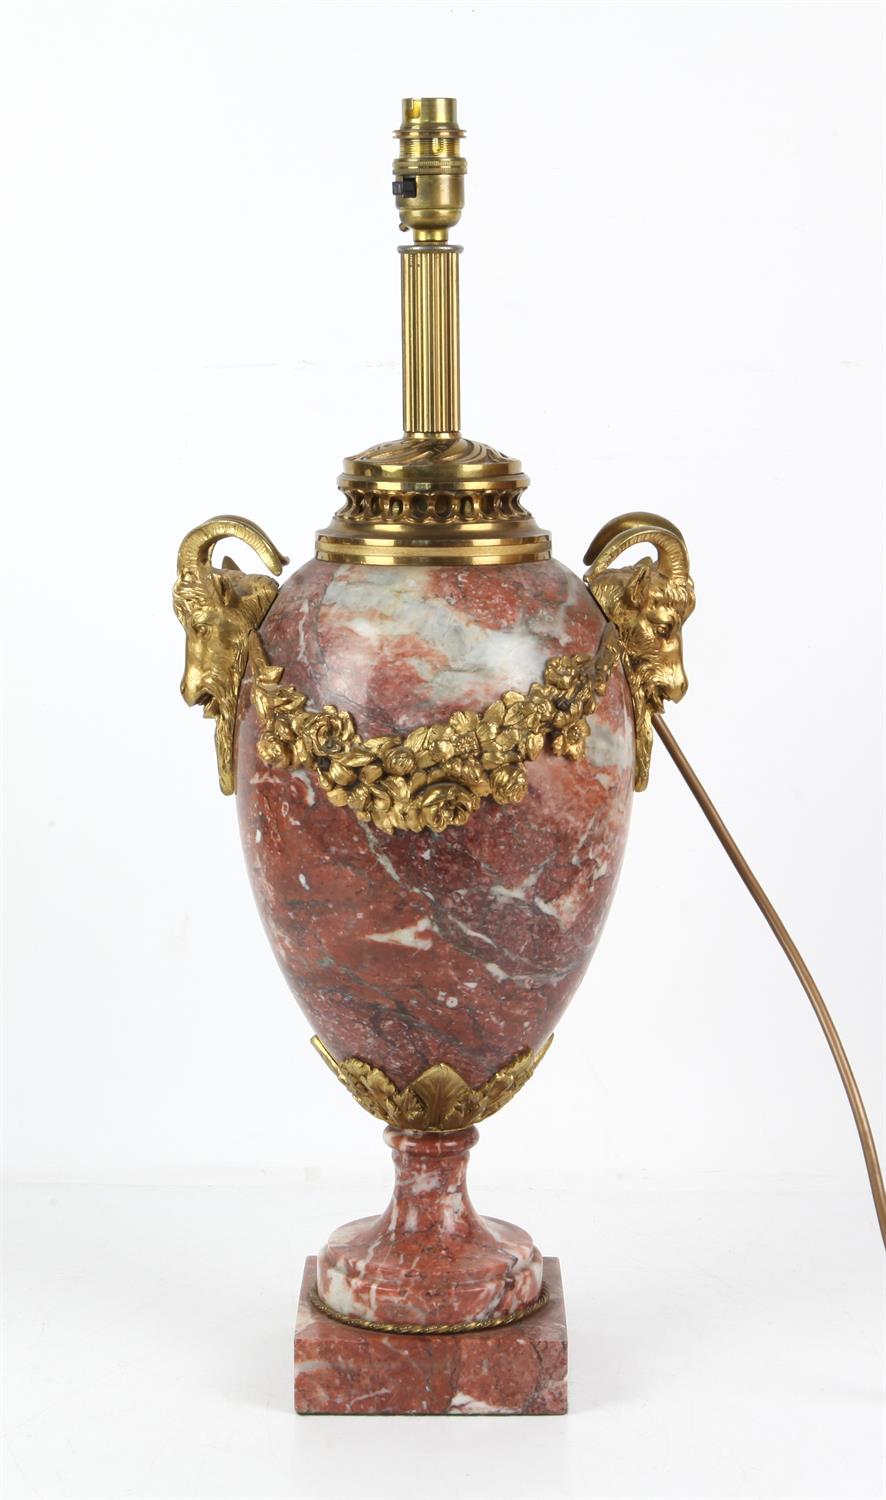 AMENDED DESCRIPTION - Red marble and ormolu mounted vase shape table lamp, in the French 19th